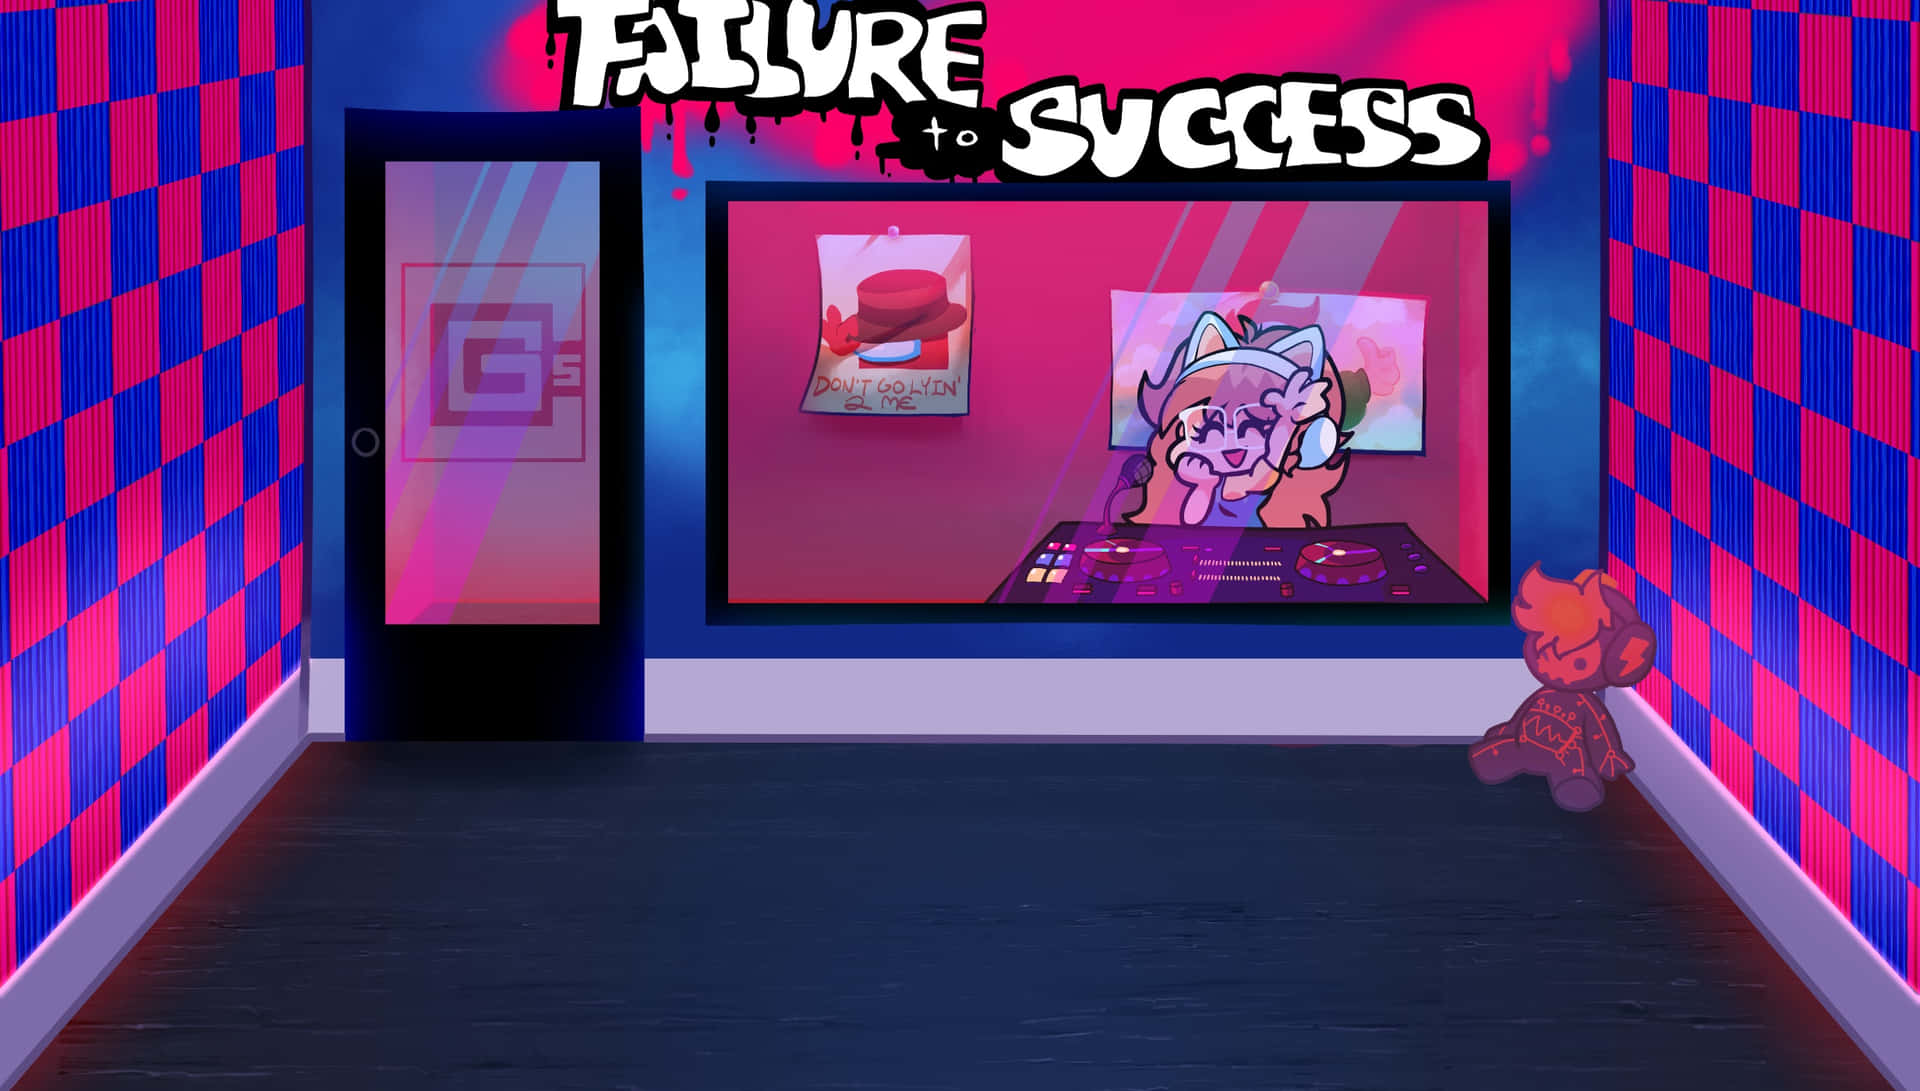 A Room With A Pink And Purple Wall And A Sign That Says Treasure Success